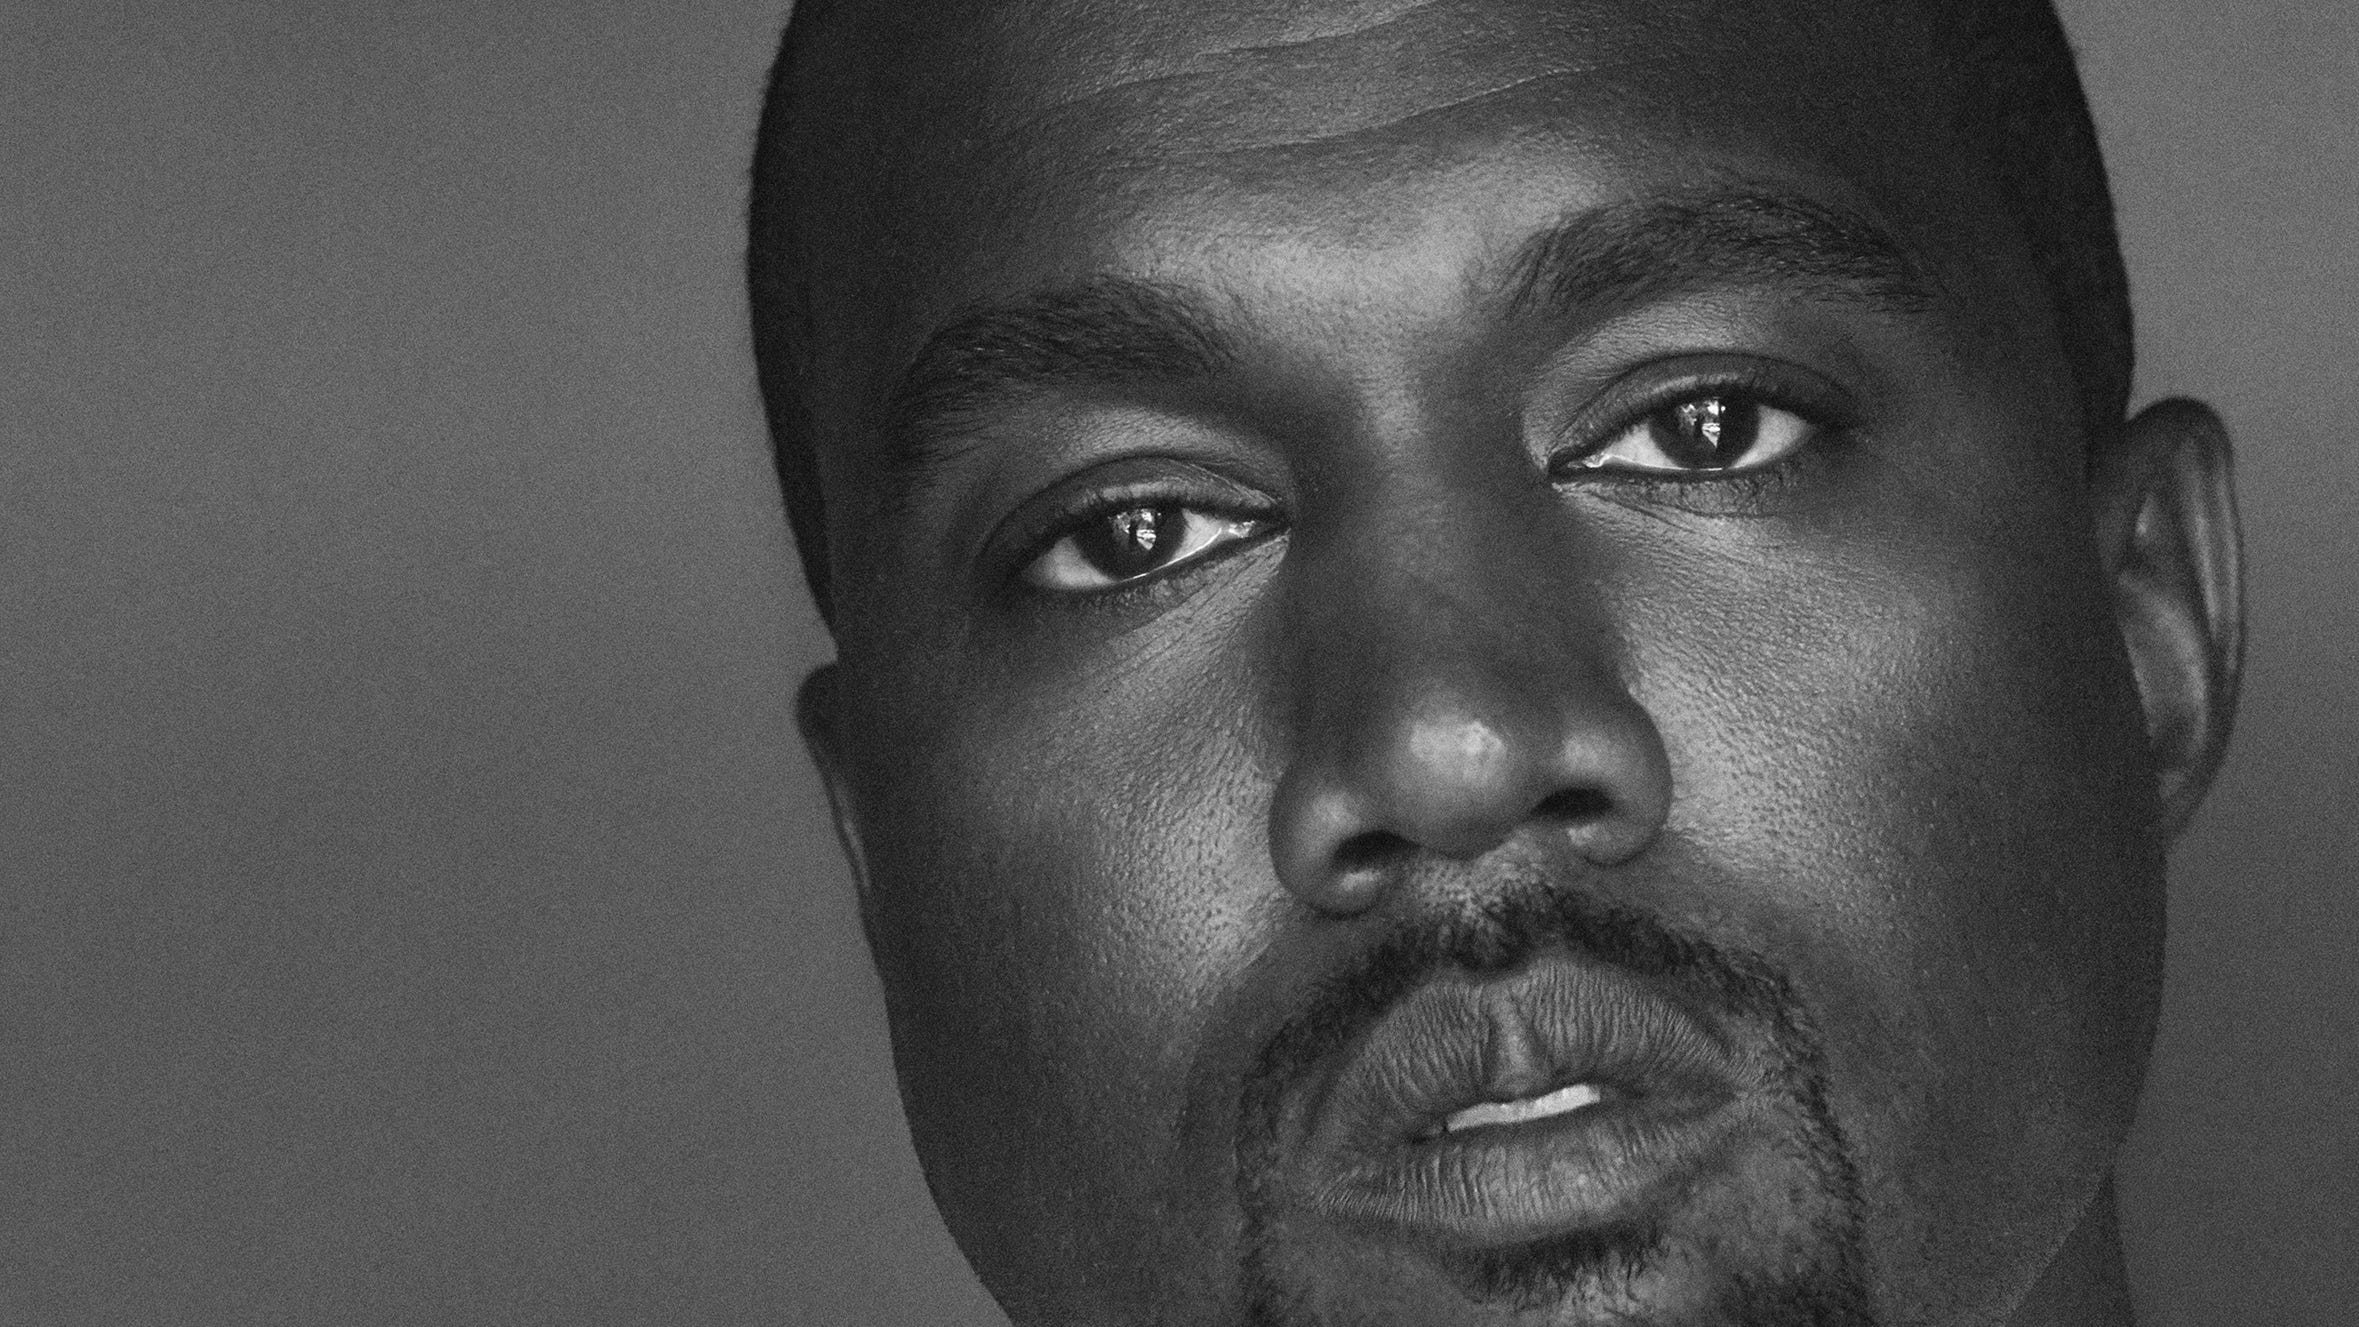 Kanye West Running For President In 2020 His 4th Of July Tweet Says